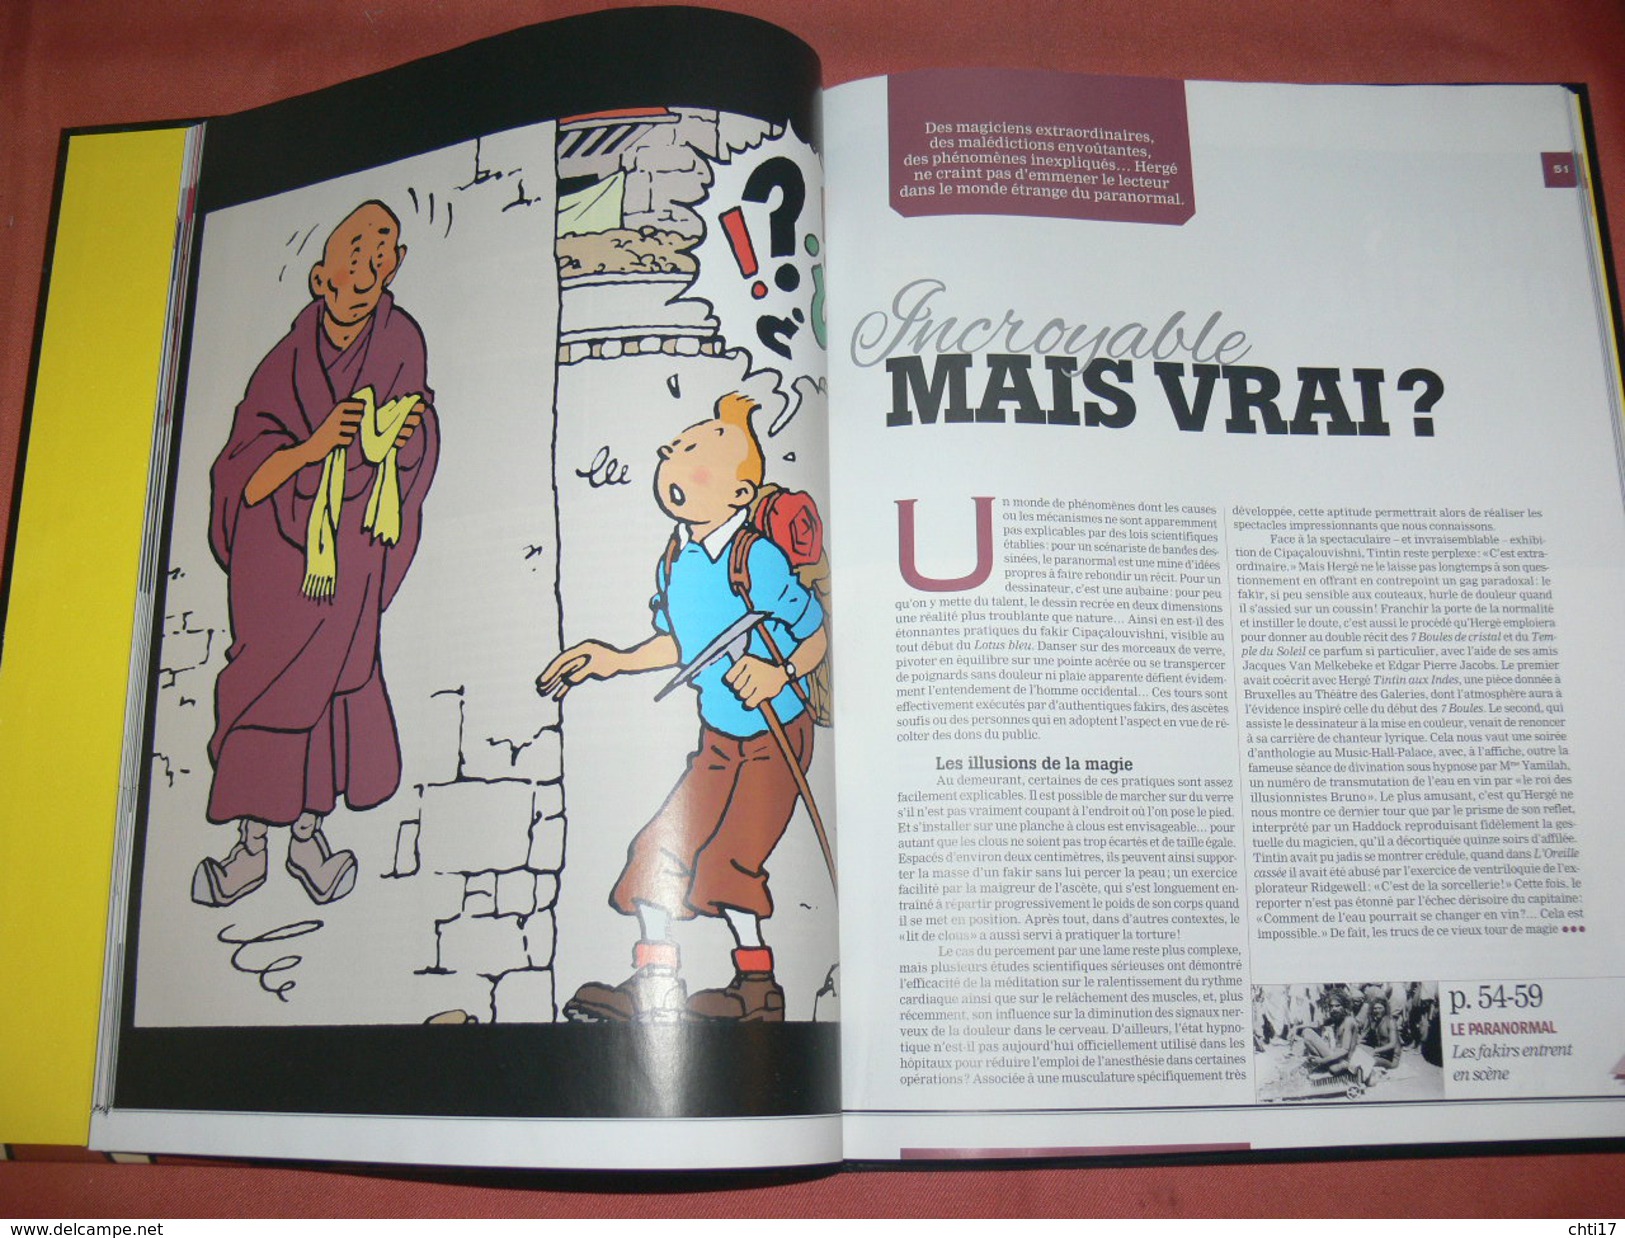 TINTIN / HERGE/ LES FORCES OBSCURES QUI ONT INSPIRES HERGE / REVE VOYANCE HYPNOSE RADIESTHESIE FOLIE SUPERSTITION /2013